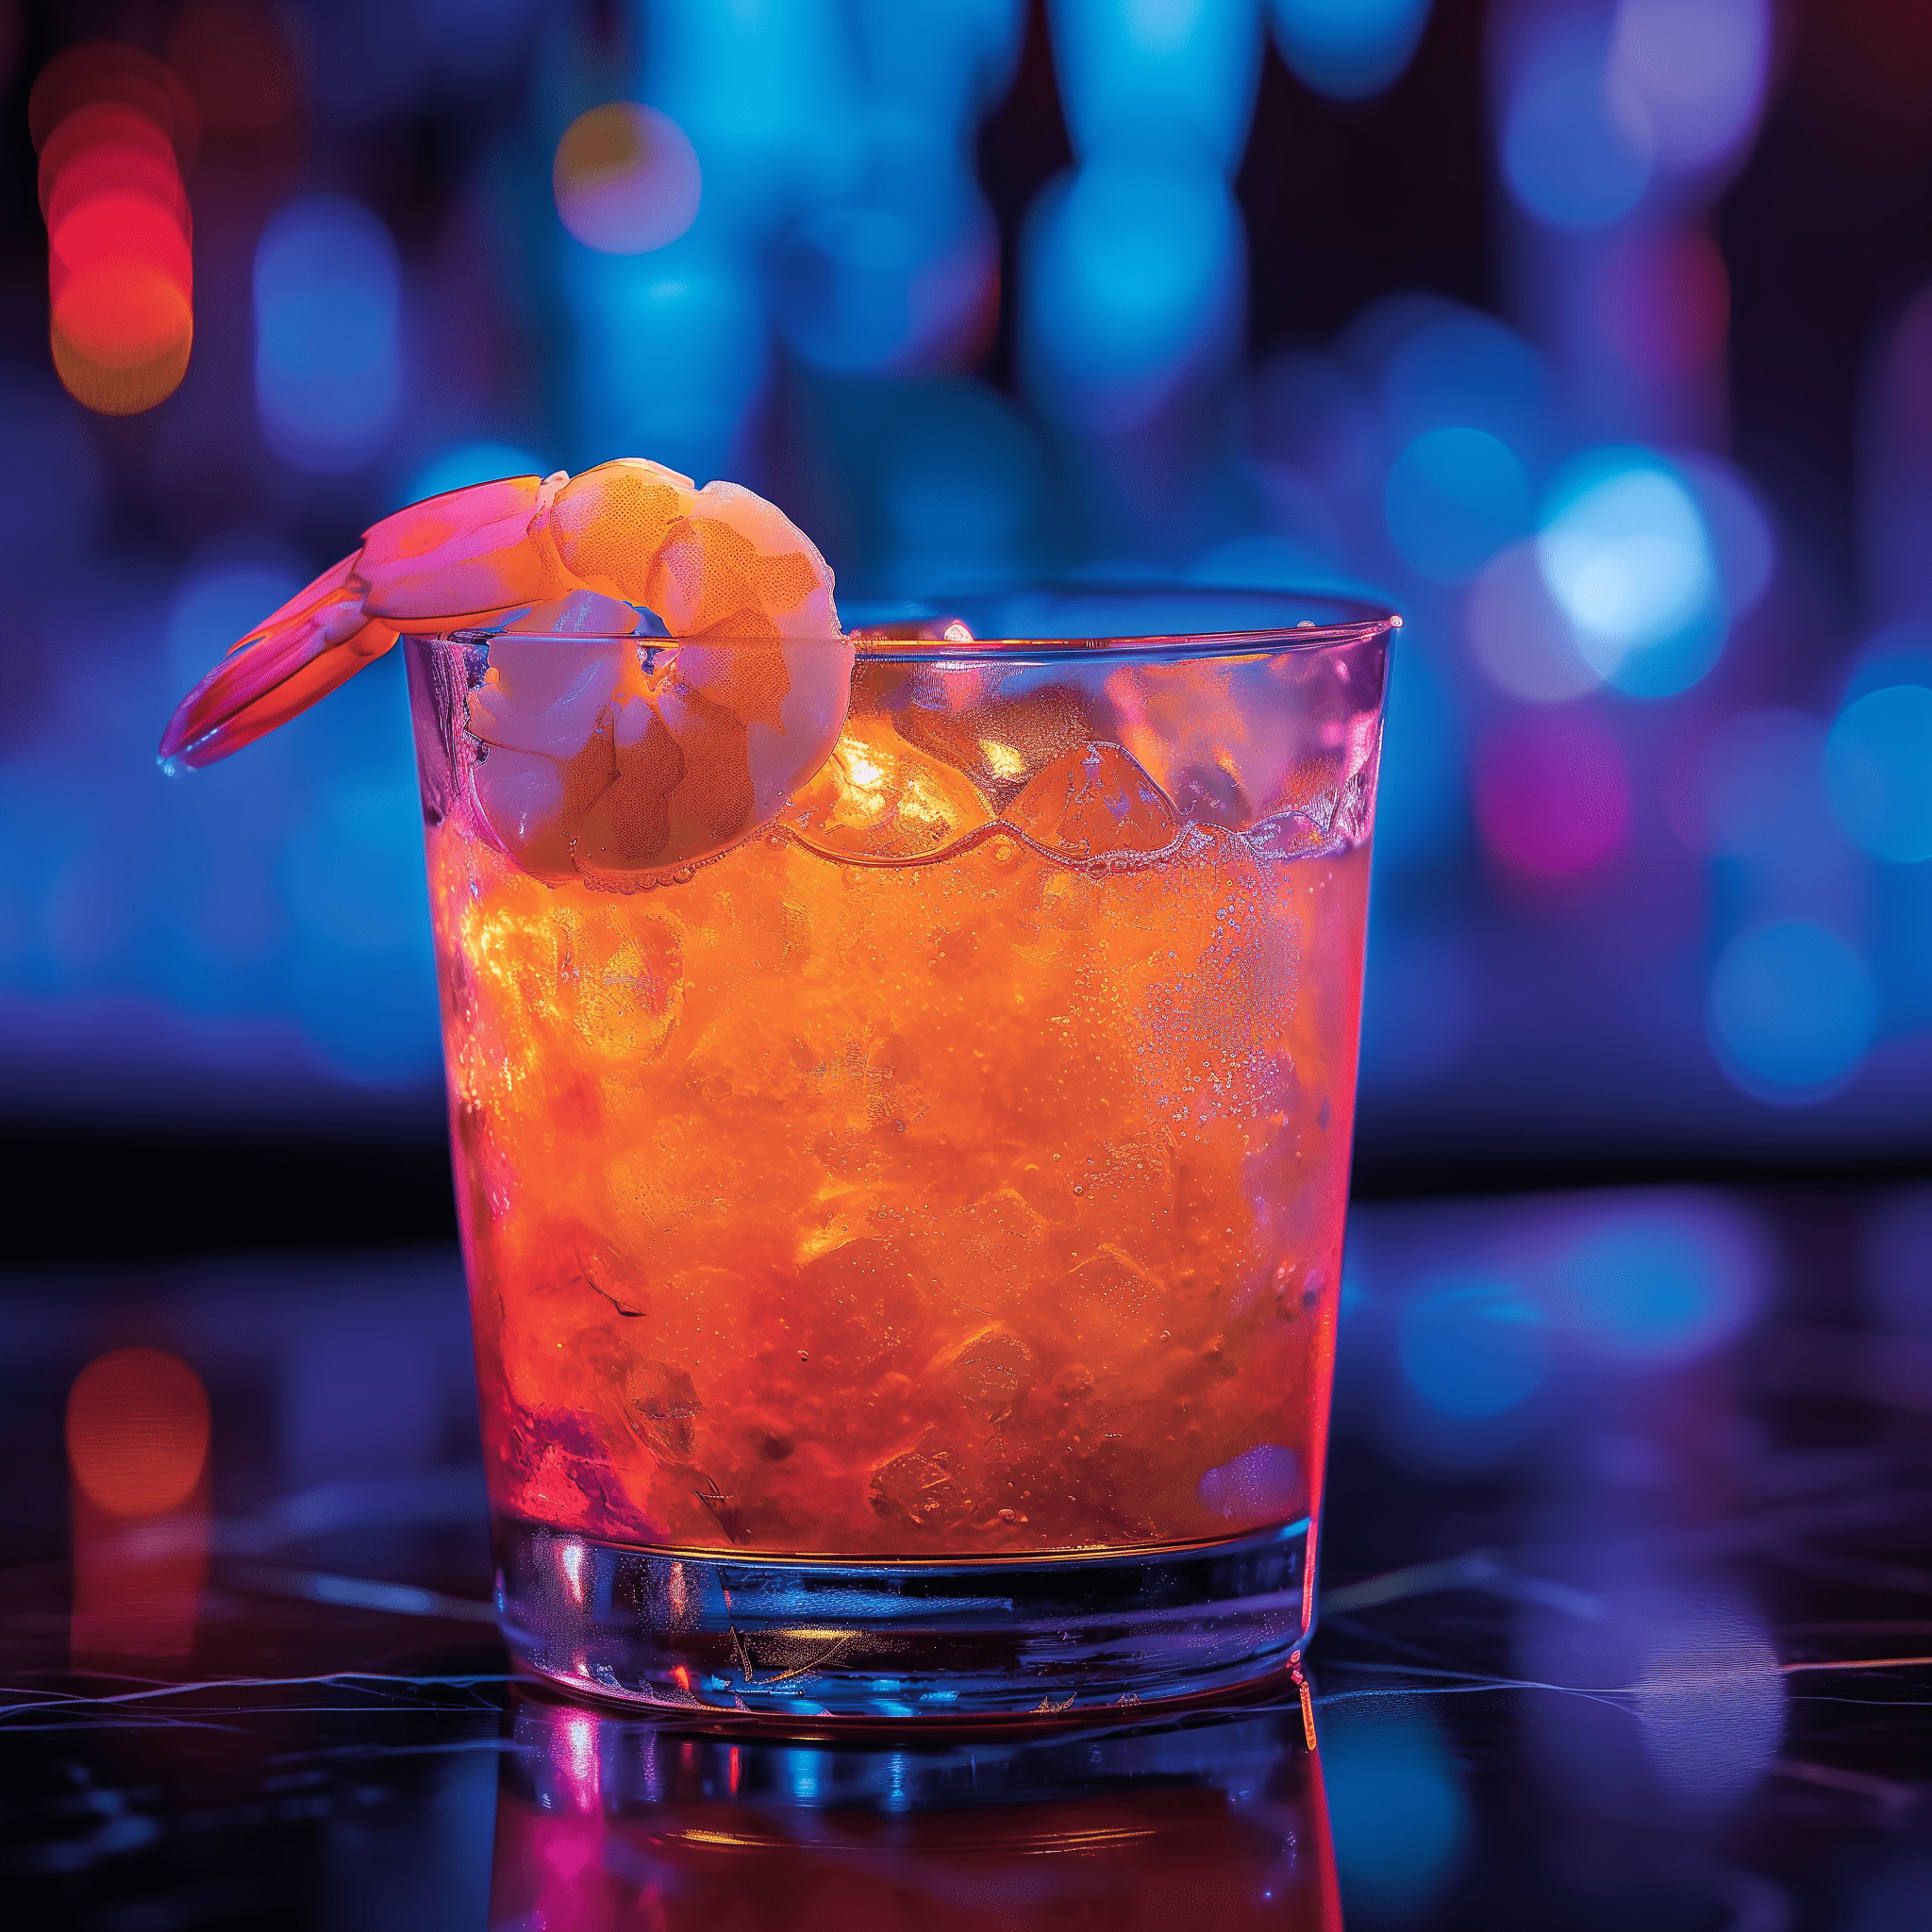 MoonShot Cocktail Recipe - The MoonShot cocktail offers a savory and slightly spicy taste profile, with the botanical notes of gin cutting through the rich tomato base. The dash of Tabasco adds a kick that lingers on the palate, making it a robust and invigorating drink.